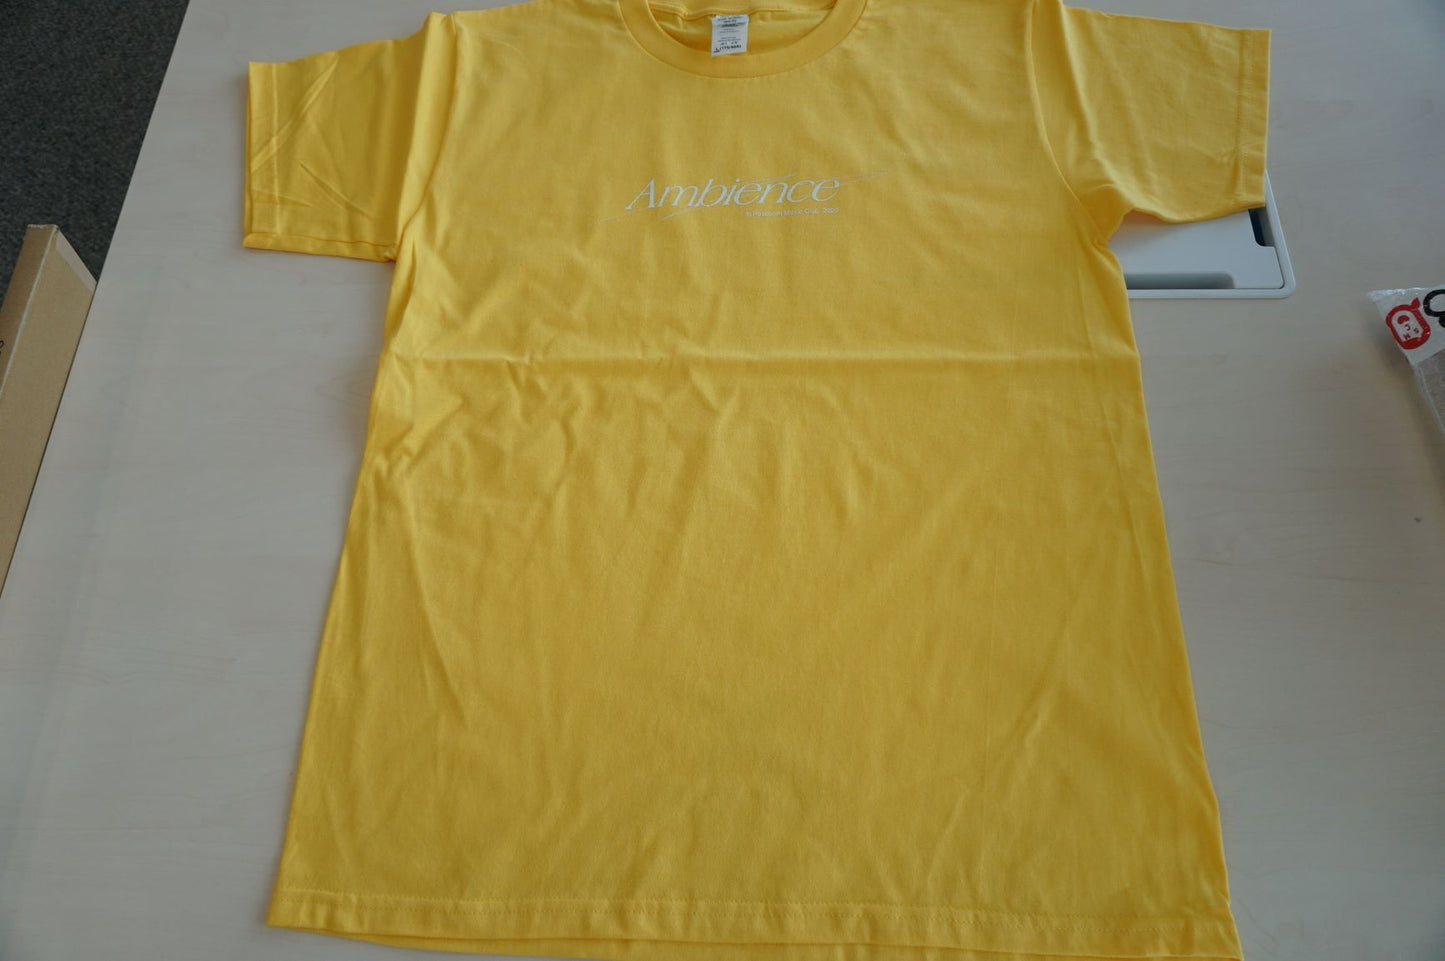 "Ambience" T-shirt (5color)